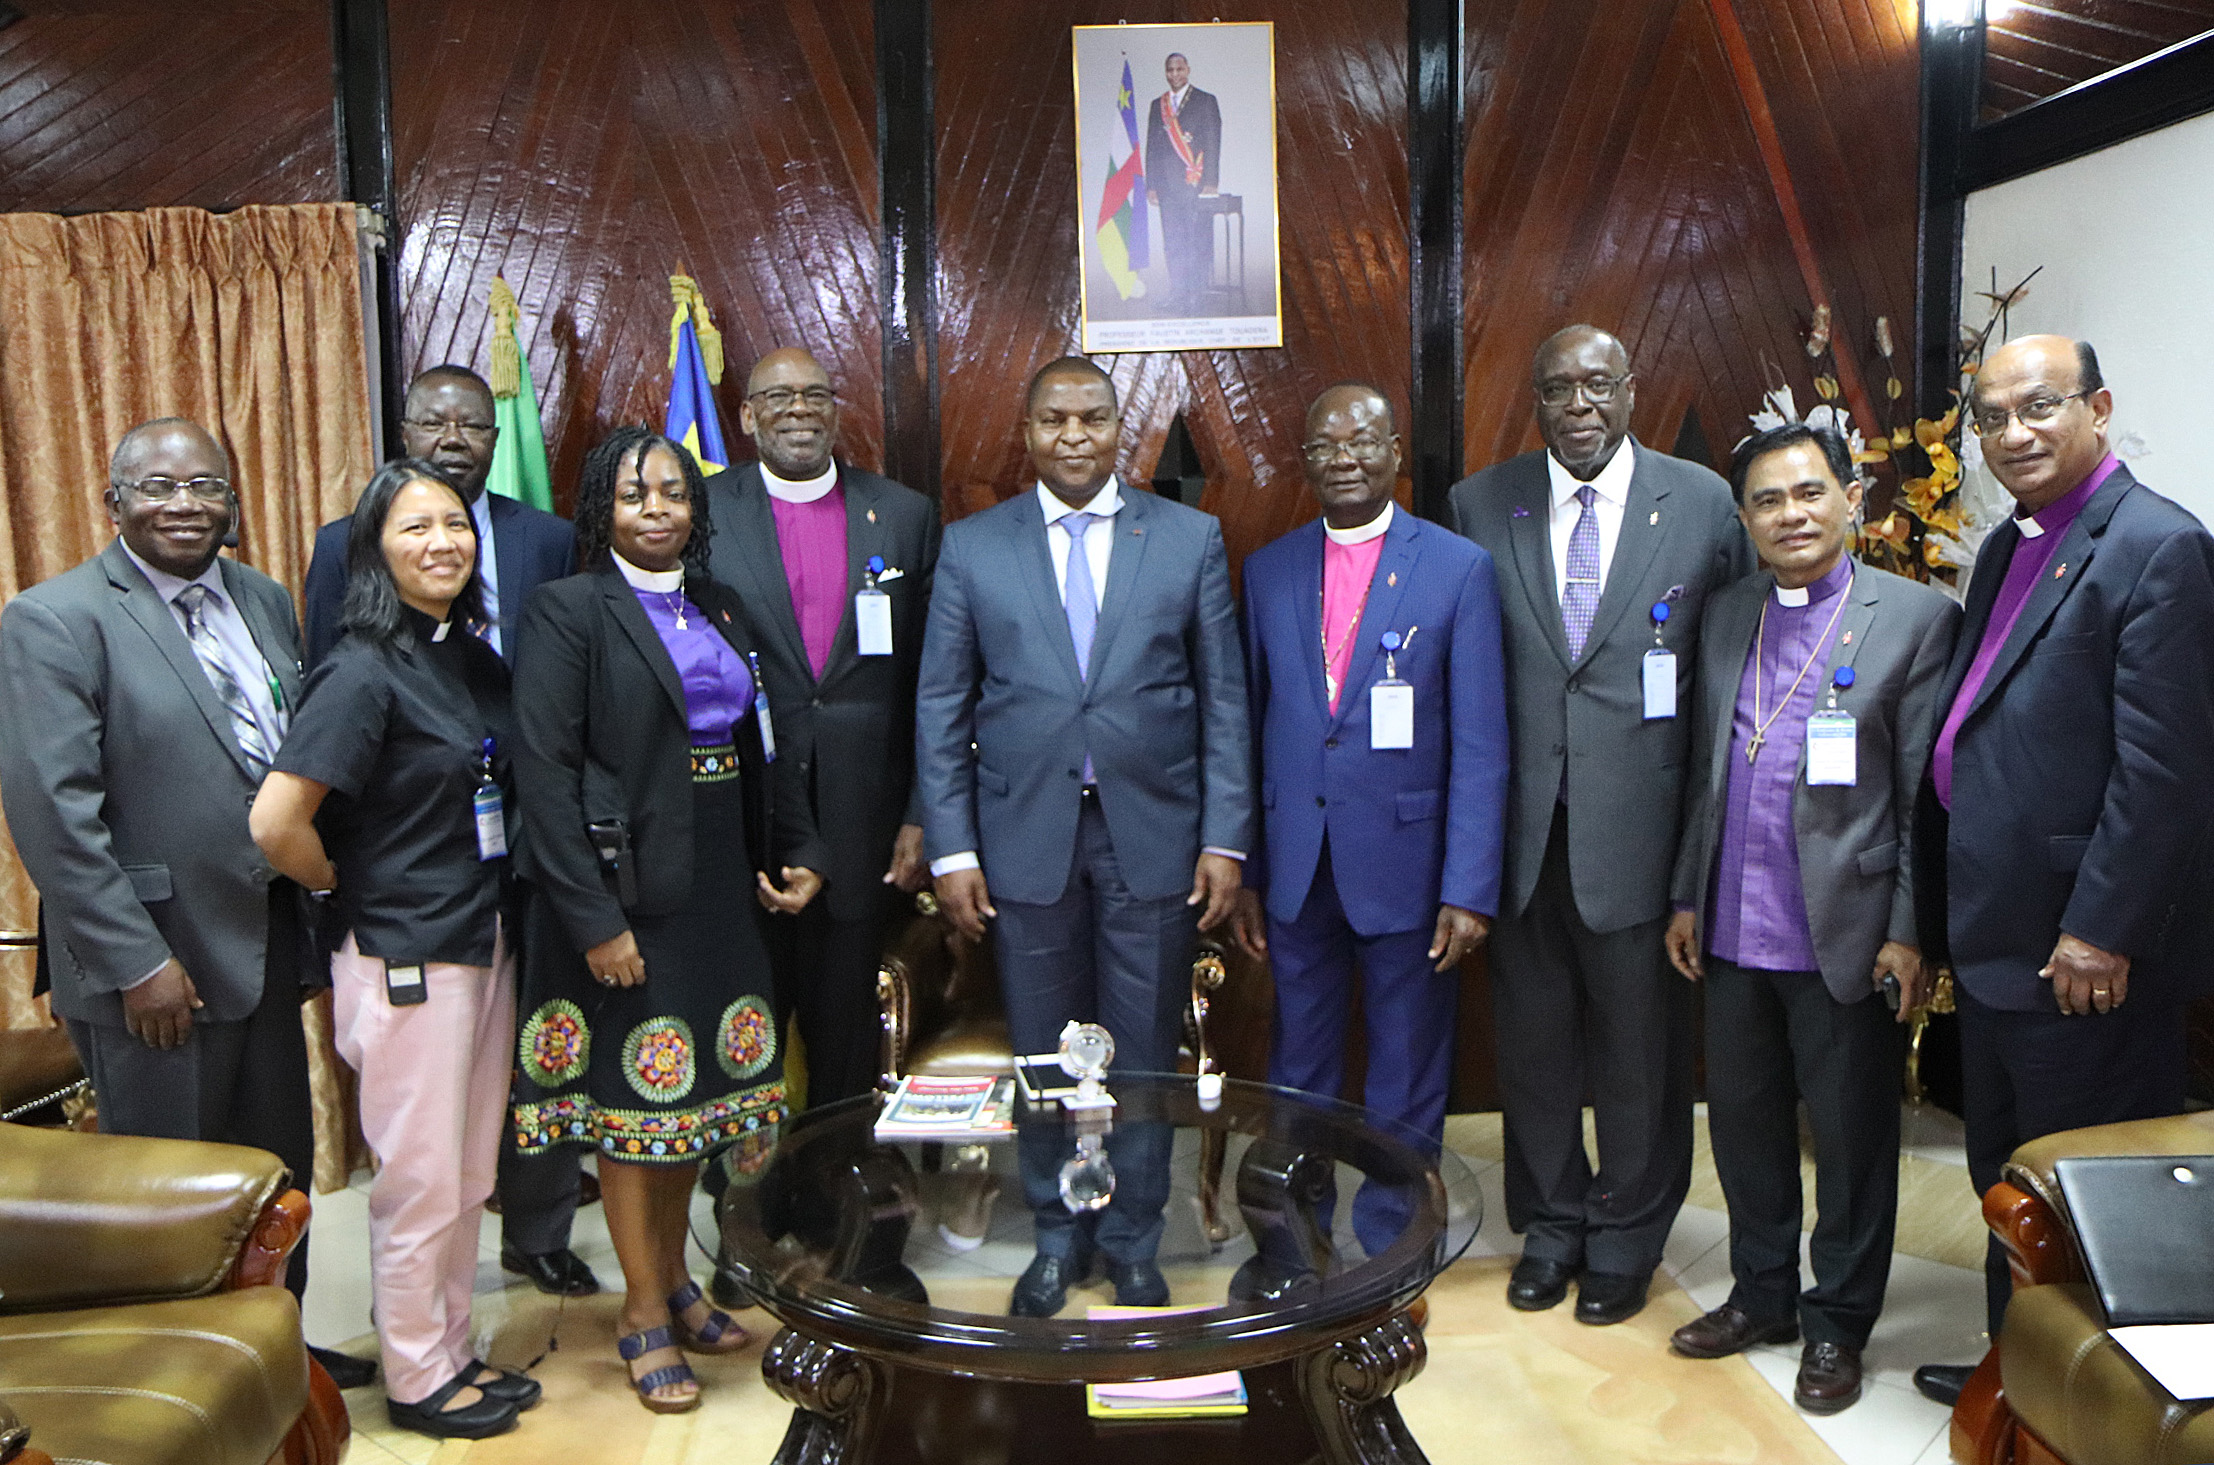 Members of The United Methodist Church Council of Bishops and Board of Global Ministries pose for a photo with Central Africa Republic President Faustin-Archange Touadéra in Bangui, Central Africa Republic. The delegation visited the country and Kenya Nov. 12-18. Photo by Isaac Broune, UMNS.